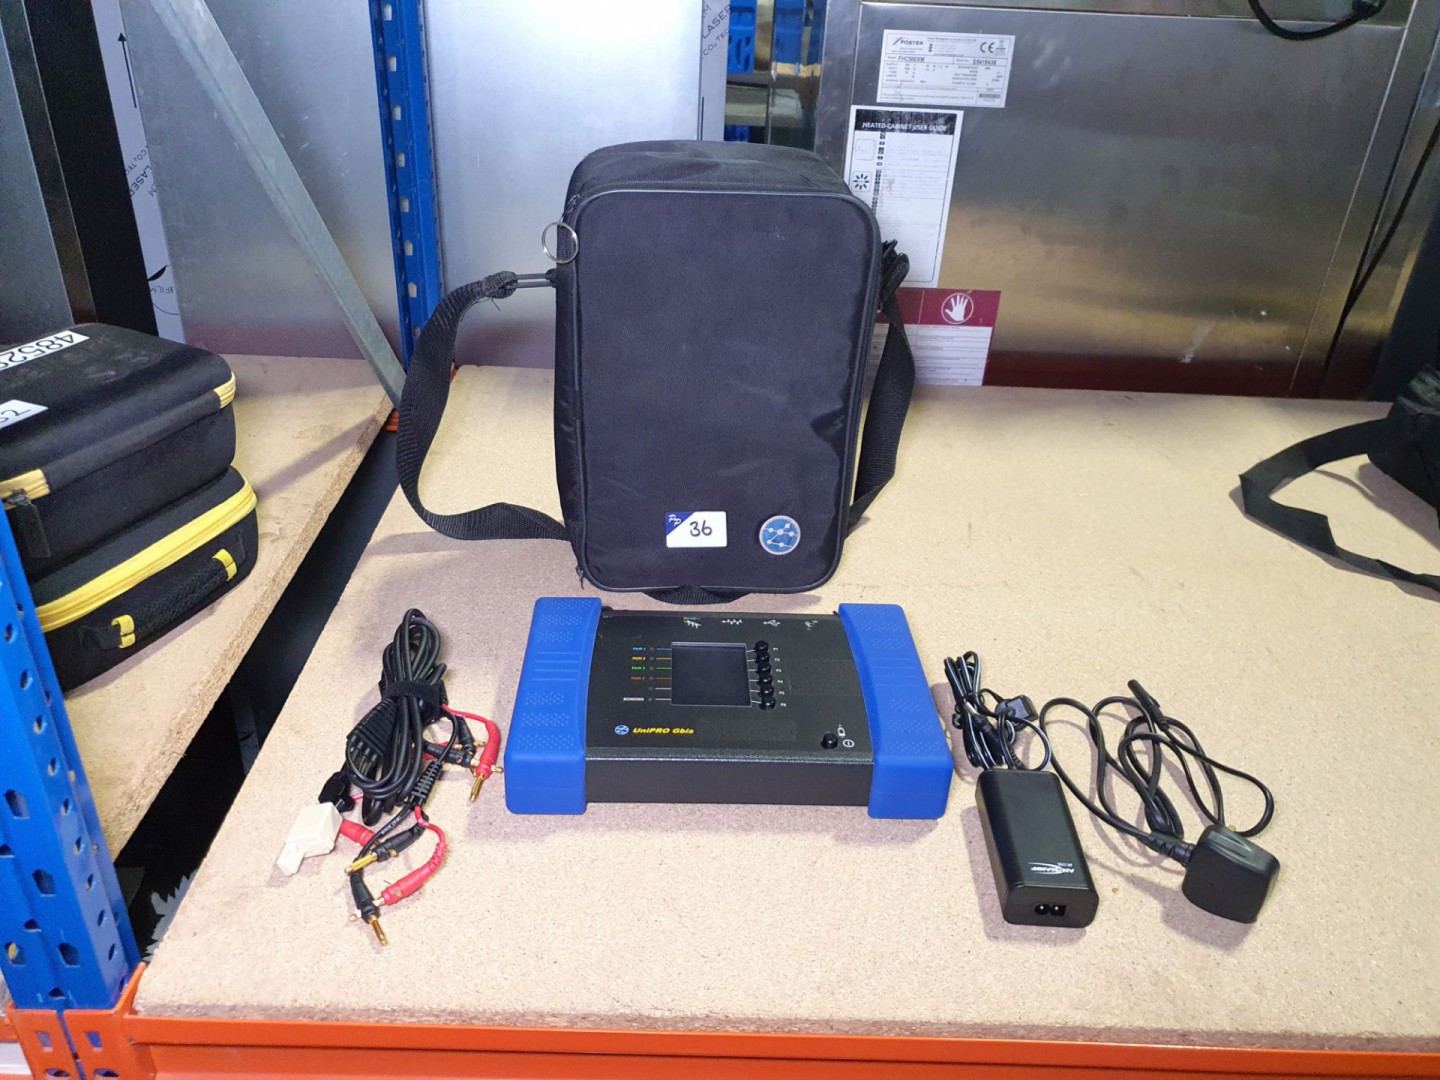 Ideal Networks Uni Pro Gbis tester in carry case